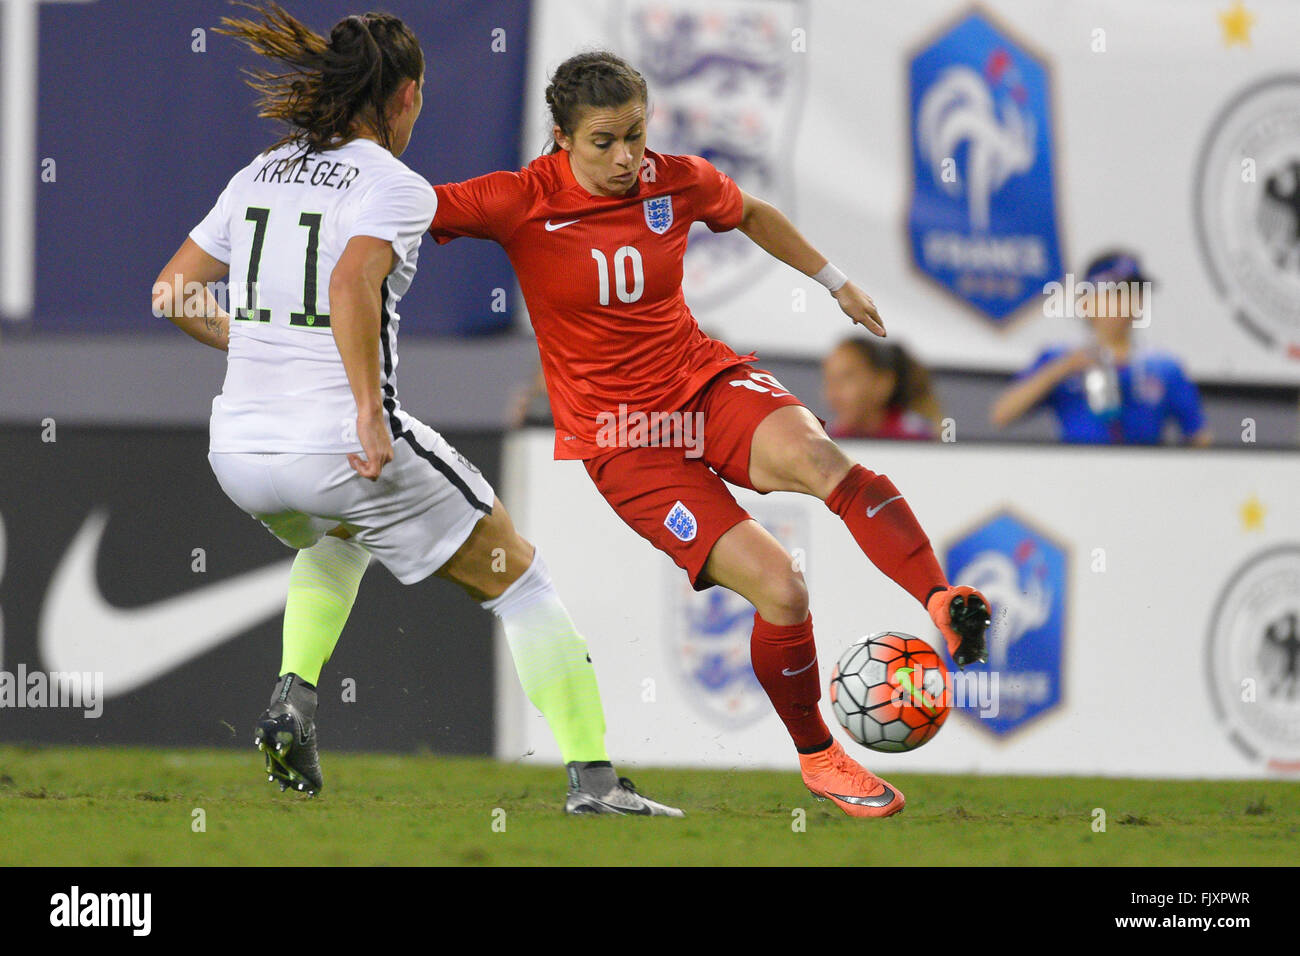 Tampa, Florida, USA. 3rd Mar, 2016. England forward Karen Carney (10) brings the ball upfield during the She Believes Cup at Raymond James Stadium on March 3, 2016 in Tampa, Florida. The US won 1-0. Credit:  Scott A. Miller/ZUMA Wire/Alamy Live News Stock Photo